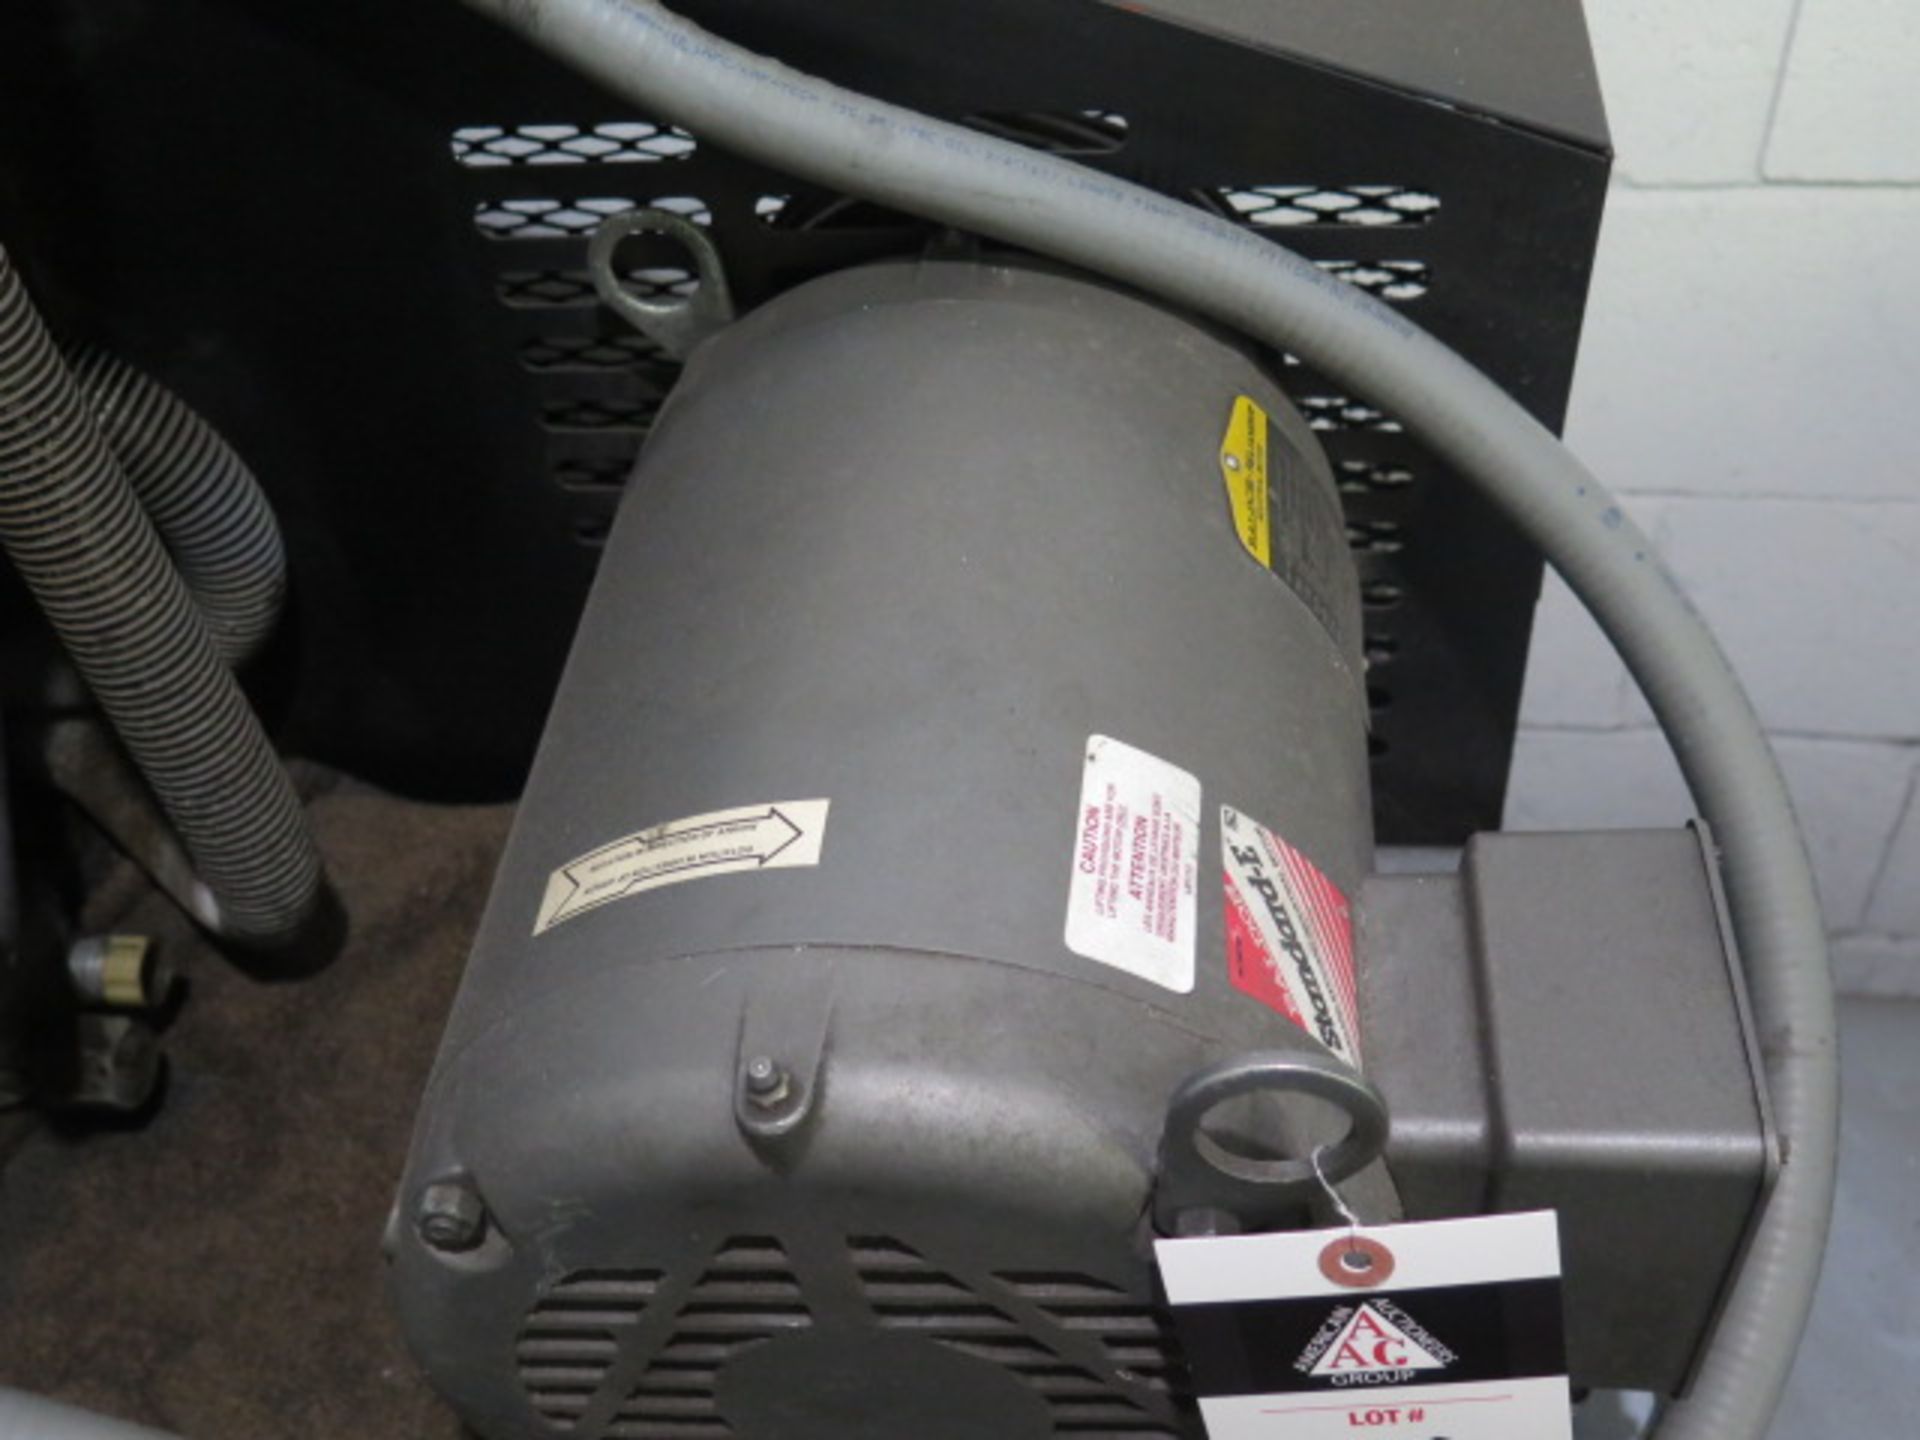 Gardner Denver HR10-12 10Hp Horizontal Air Compressor w/ 2-Stage Pump, 120 Gallon Tank, SOLD AS IS - Image 5 of 9